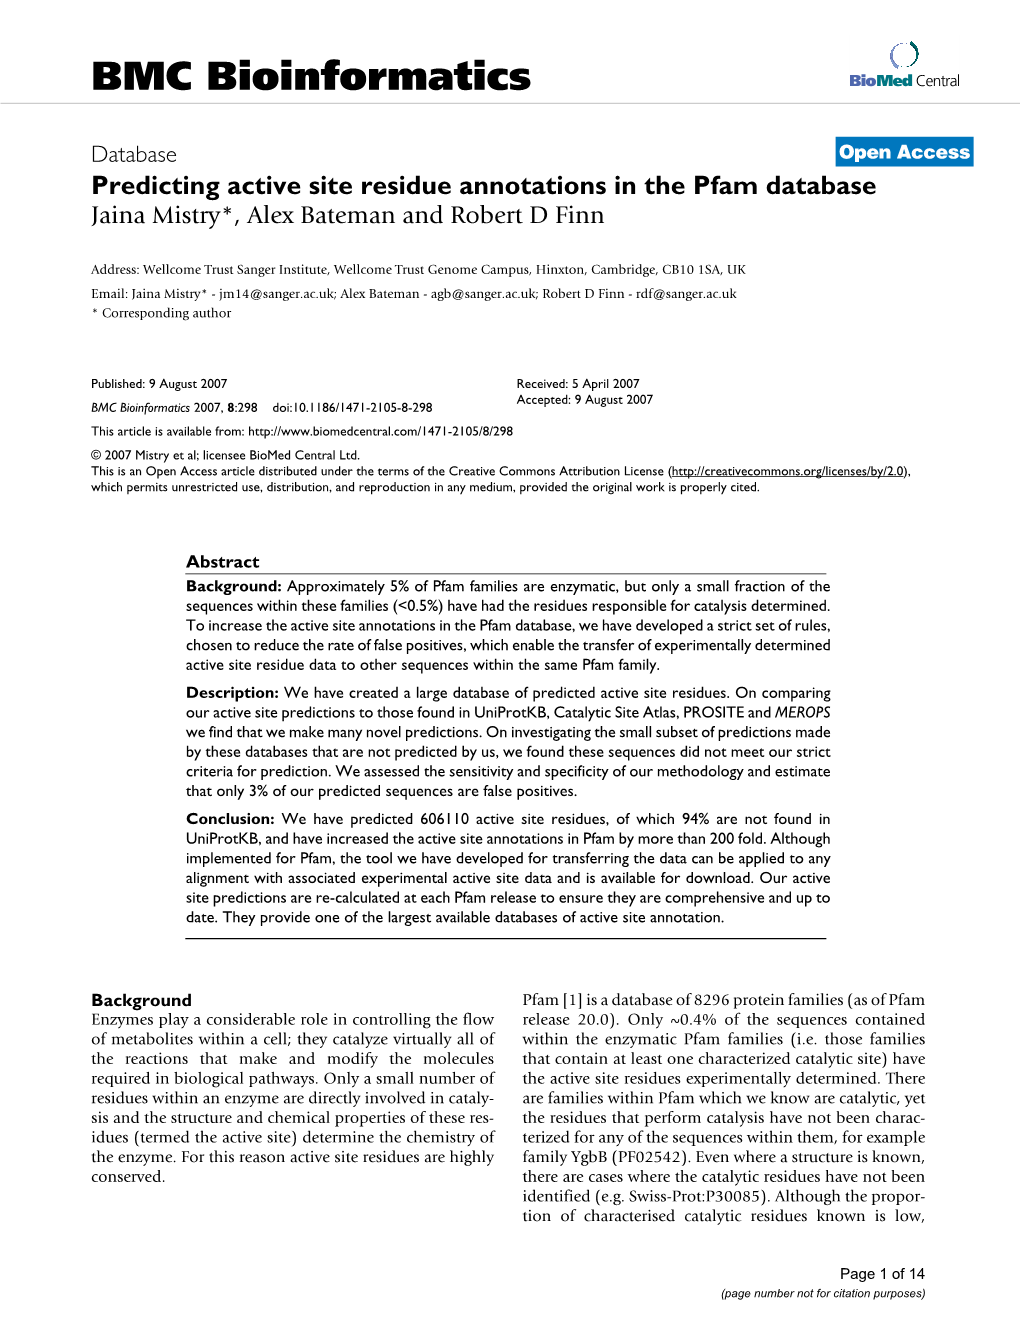 Predicting Active Site Residue Annotations in the Pfam Database Jaina Mistry*, Alex Bateman and Robert D Finn